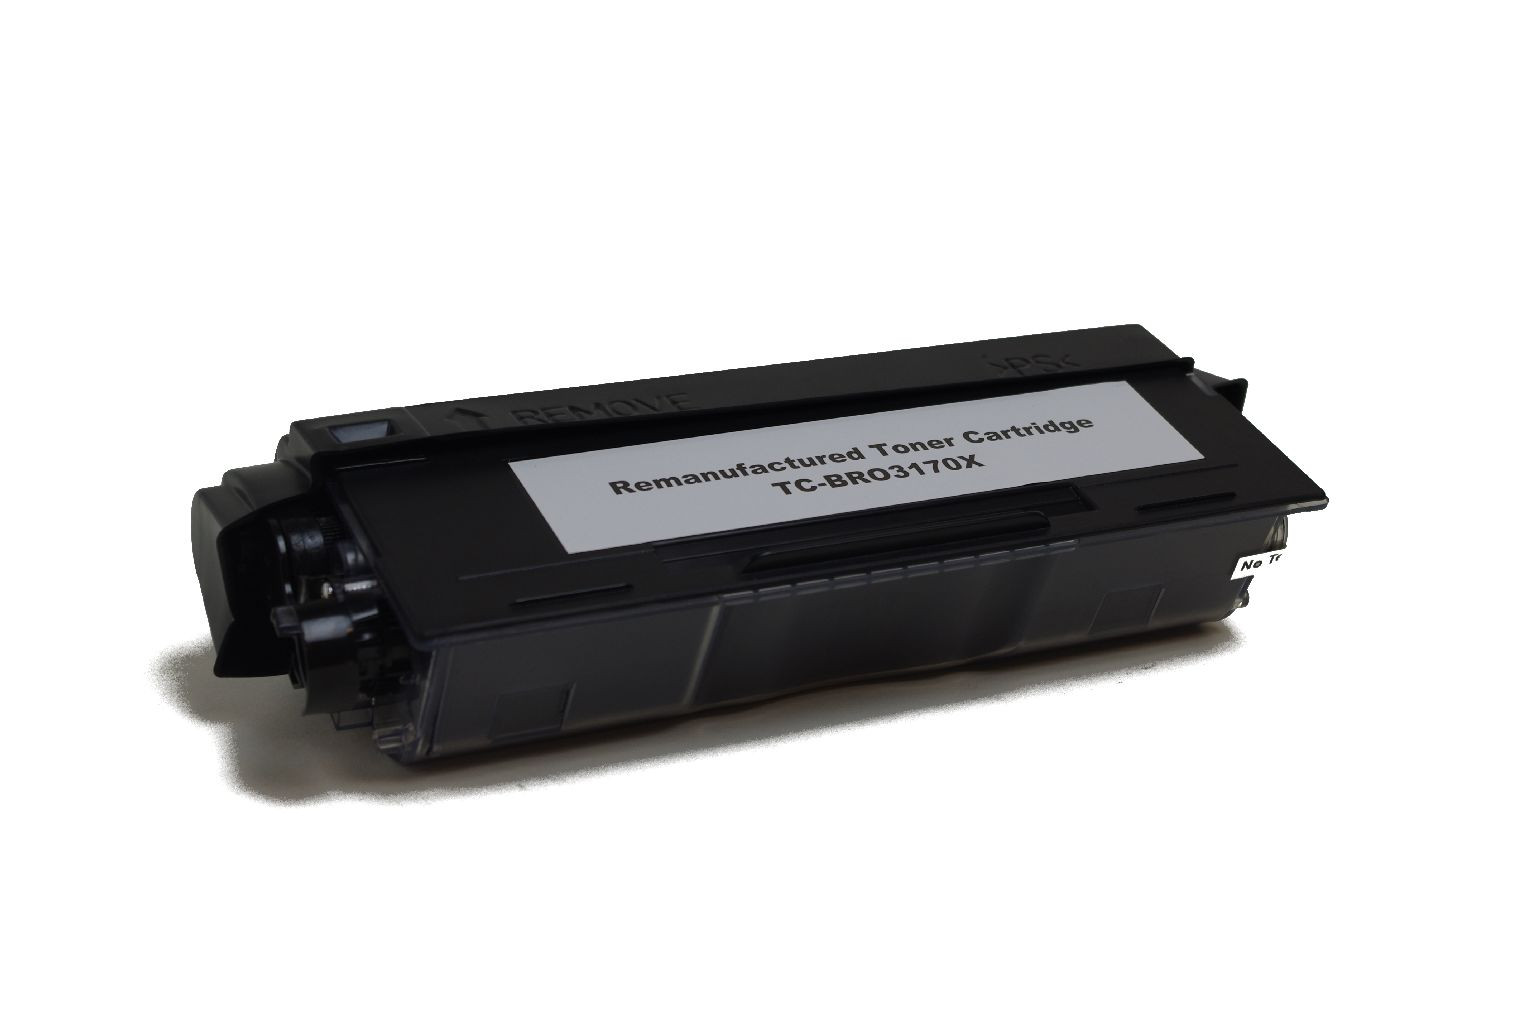 Toner cartridge (alternative) compatible with Brother - TN3280 / TN 3280 - for HL 5340 / HL 5350 / 5370 / 5380 / MFC 8370 DN / 8380 DLT / DN / 8880 DN / 8890 DW / DCP 8070 D / 8085 DN / 8880 DN / 8890 DW // X-Version 12.000 pages